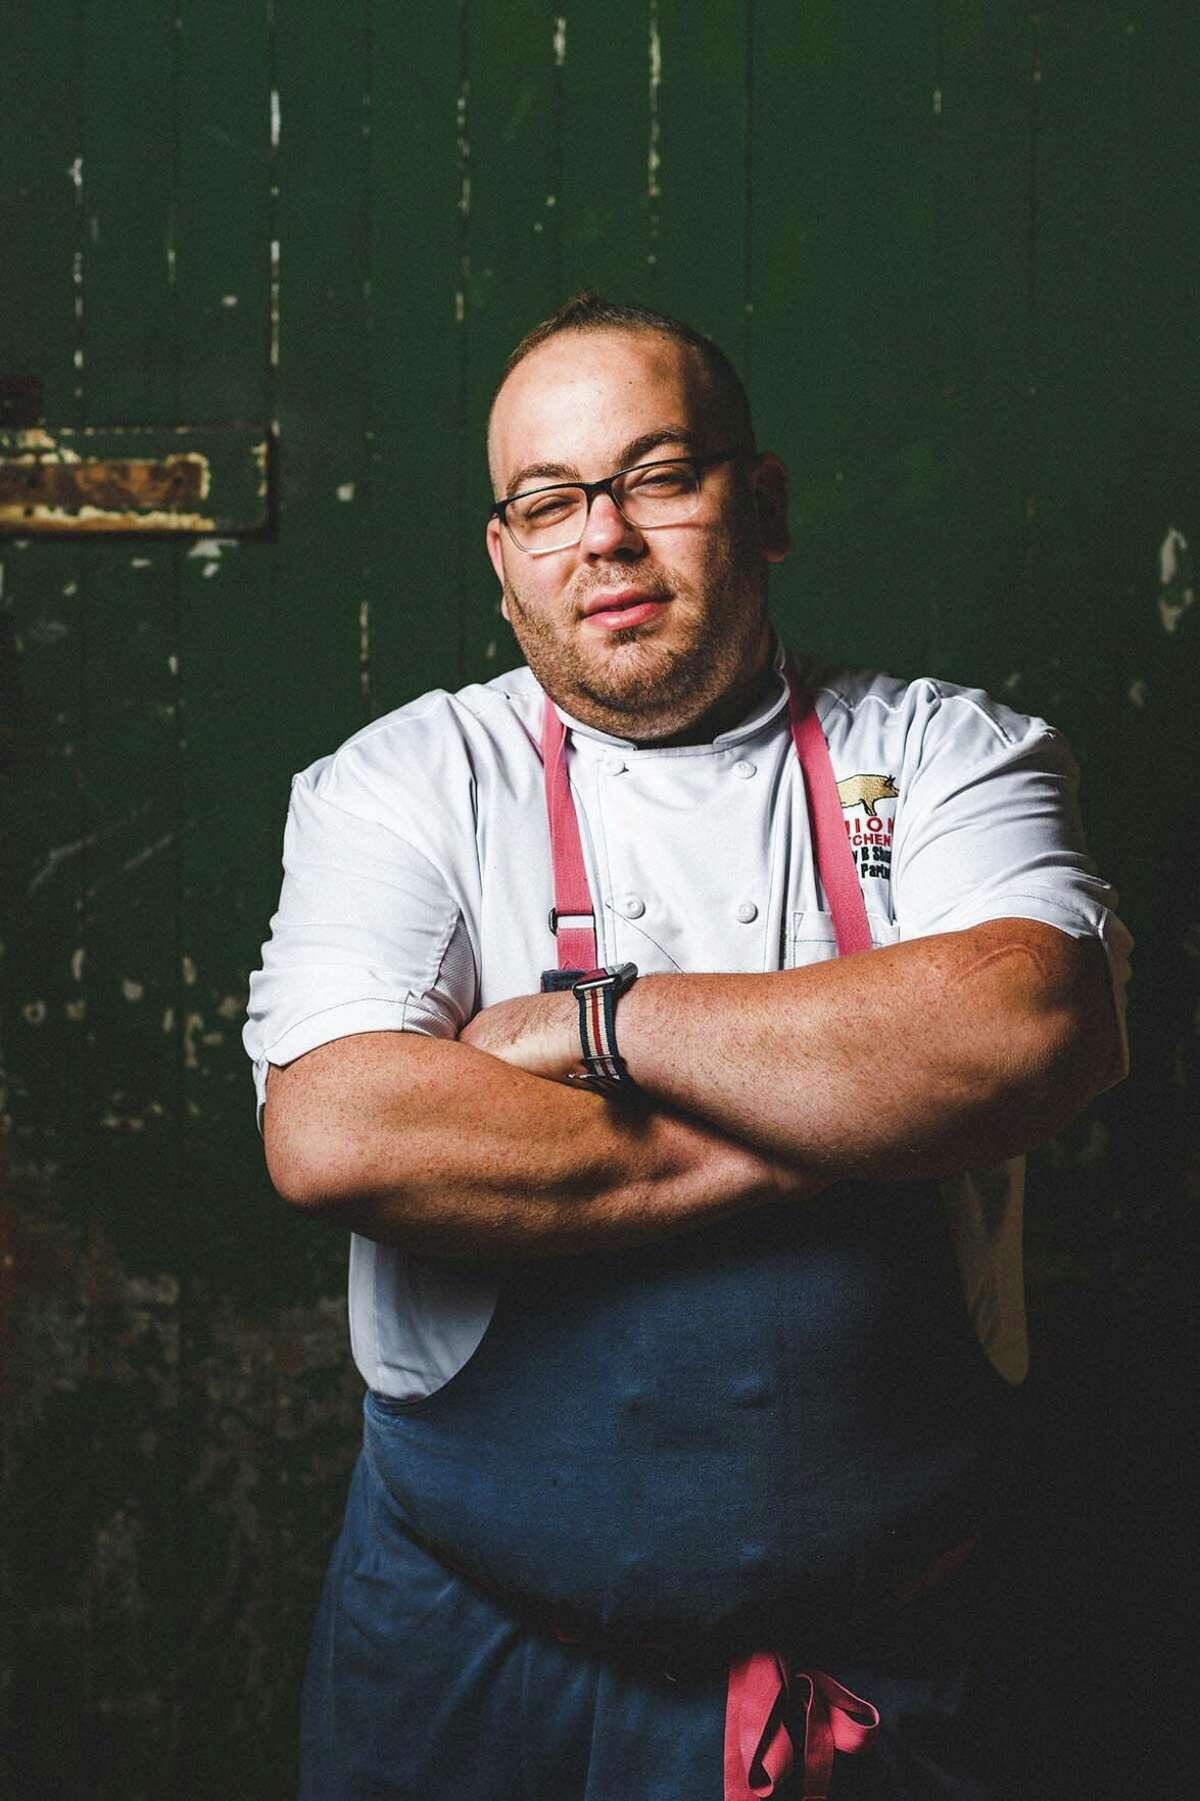 Zachary Shuman, chef-owner of Union Kitchen in West Hartford